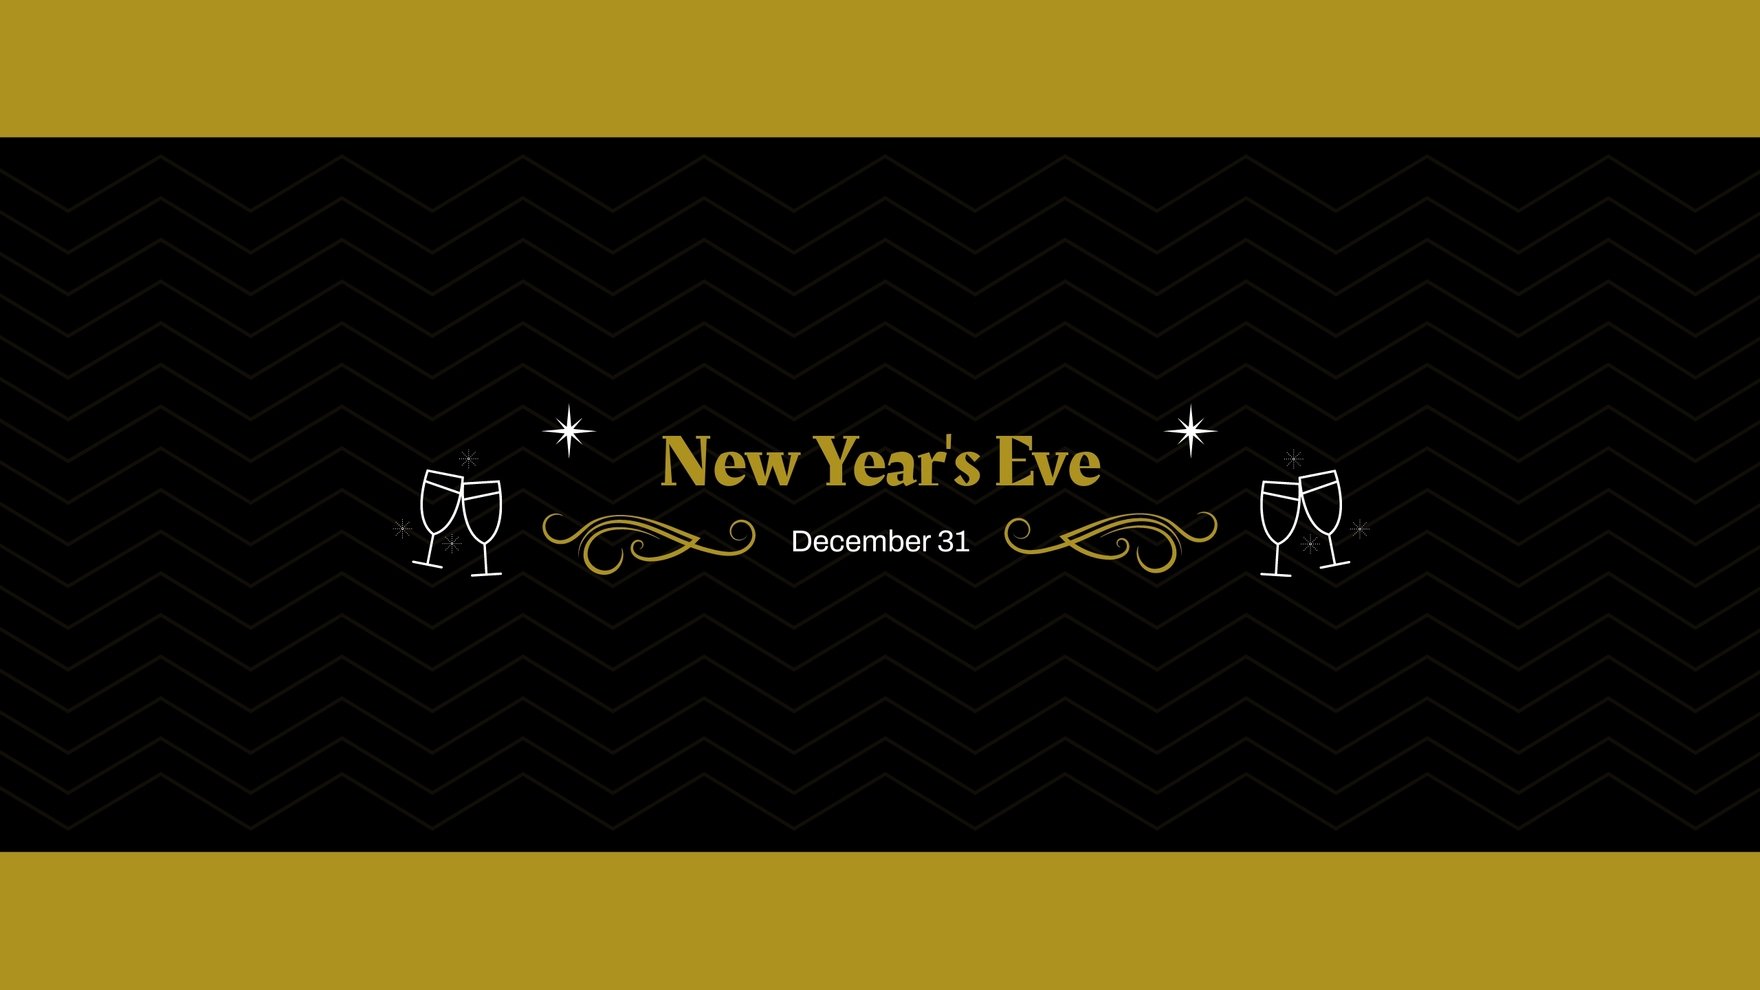 Free New Year's Eve Youtube Banner Template